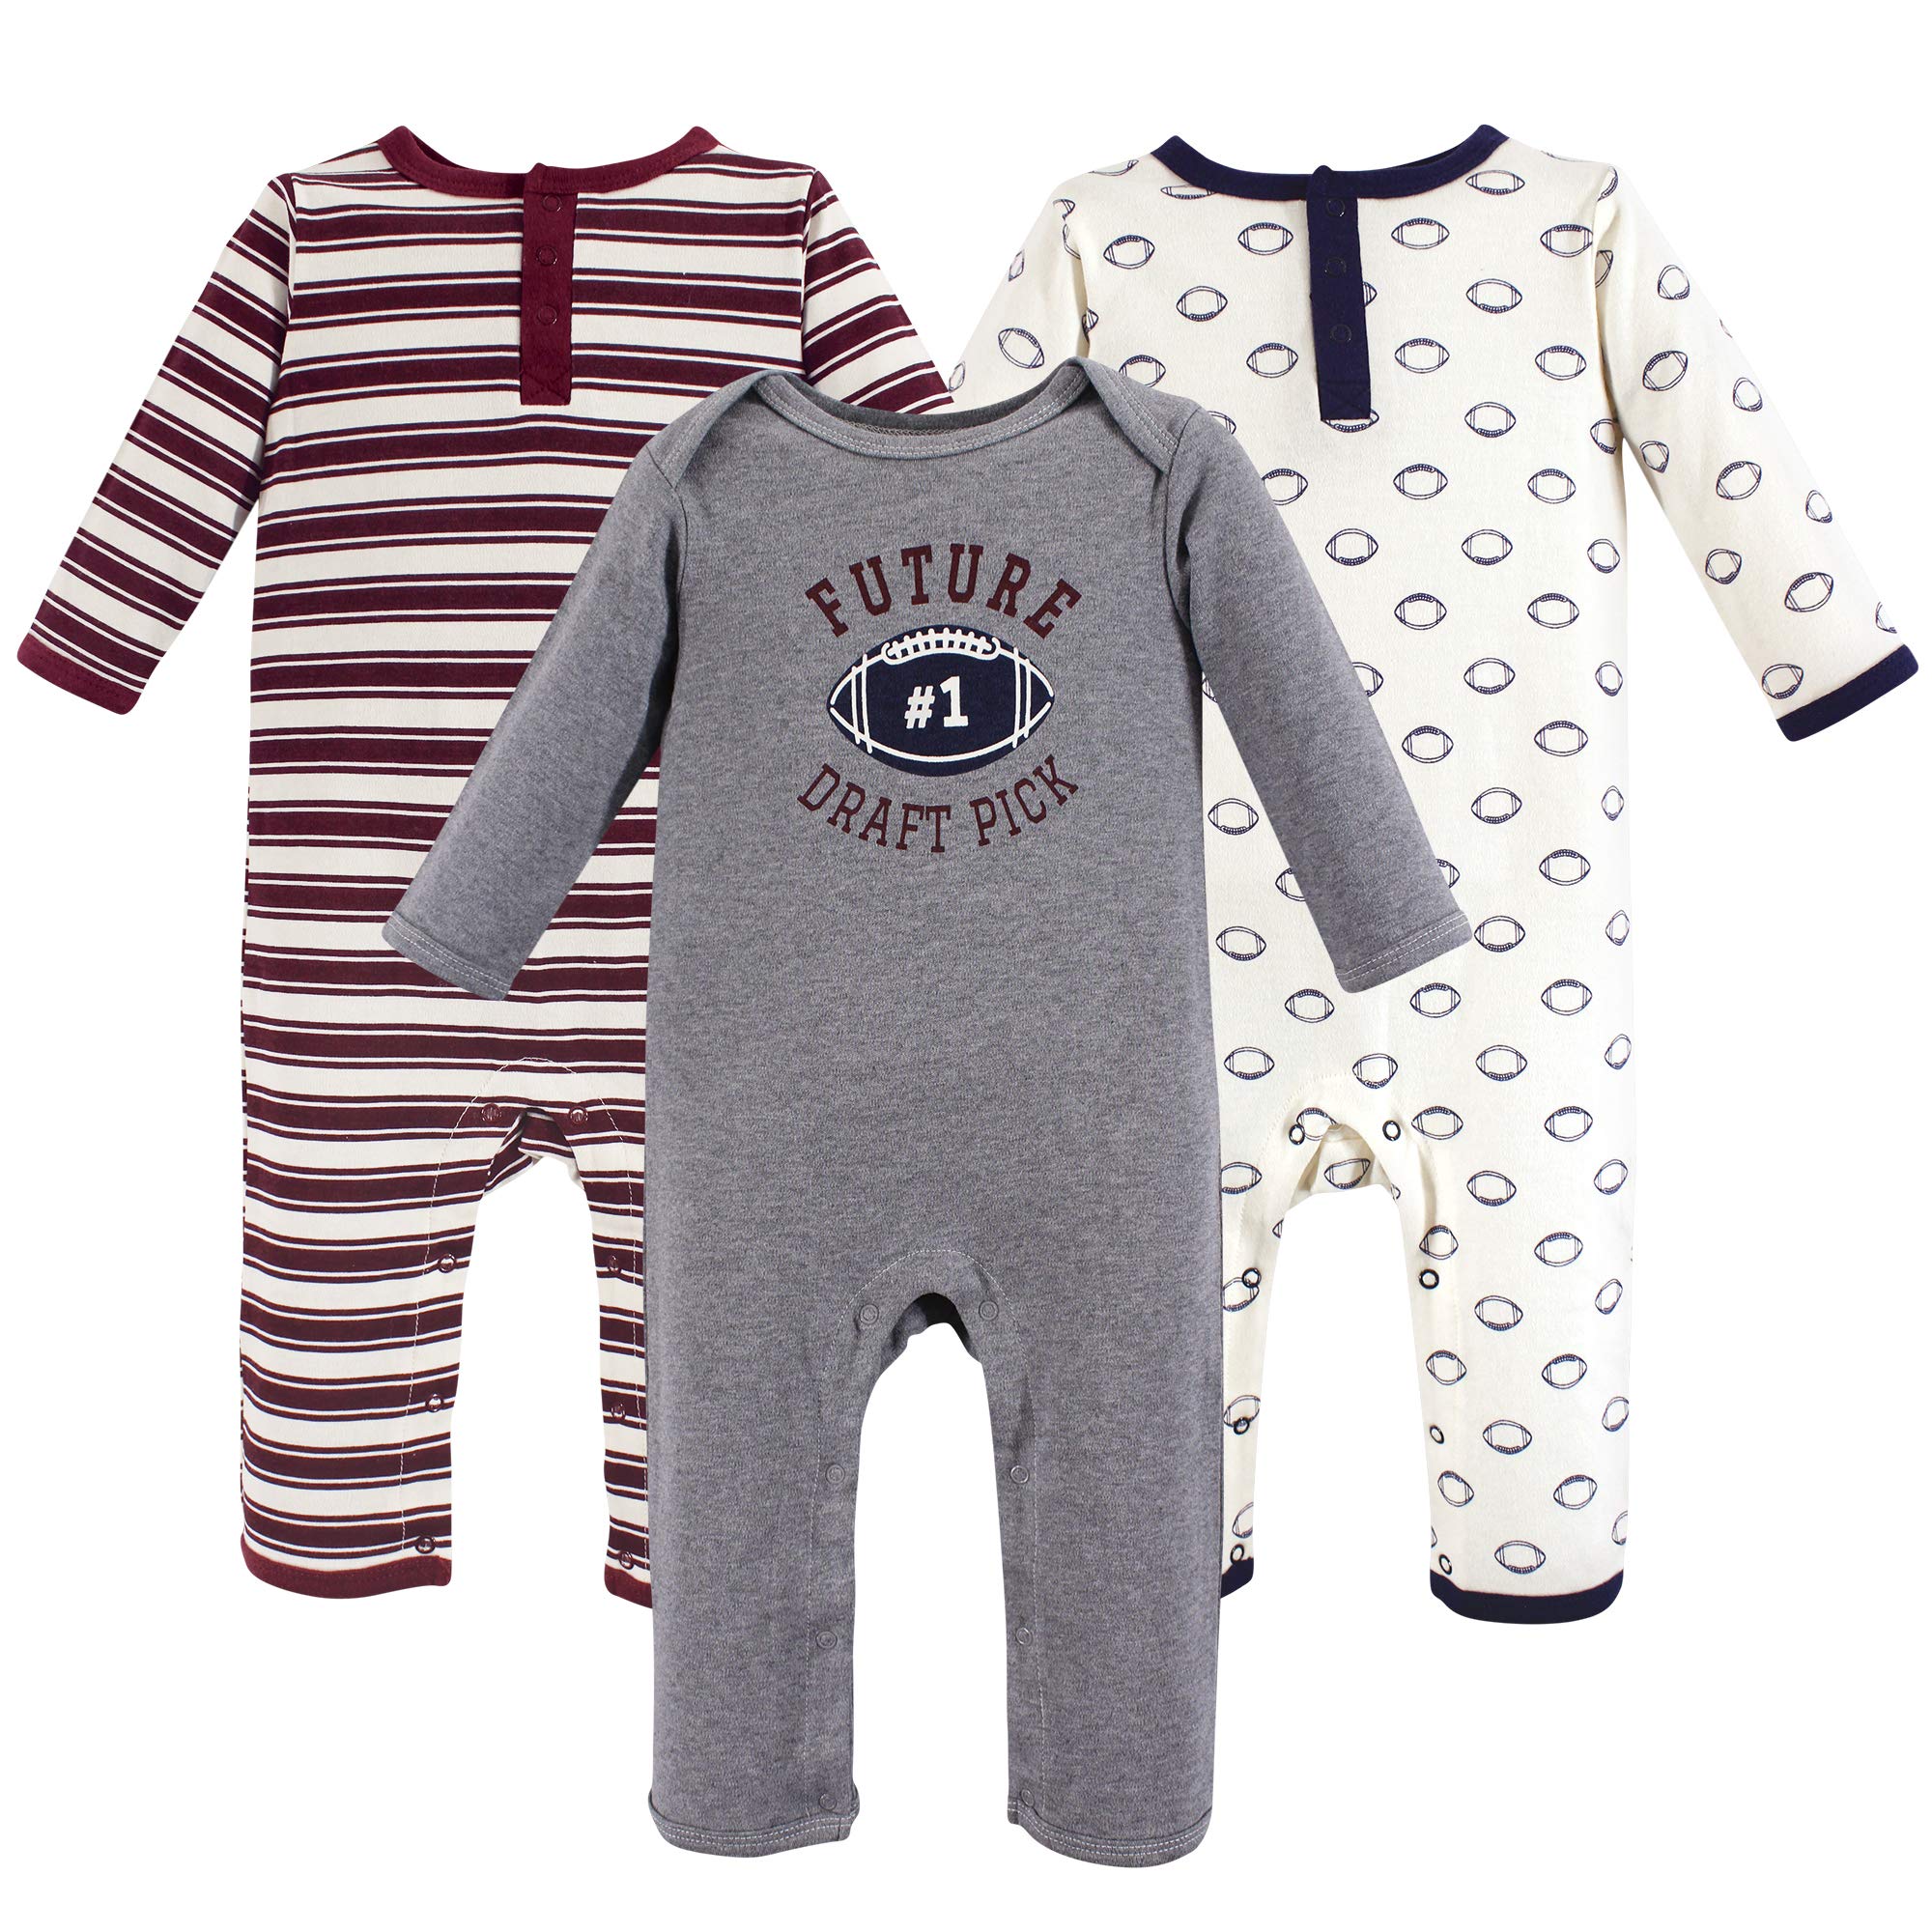 Hudson Baby Unisex Baby Cotton Coveralls